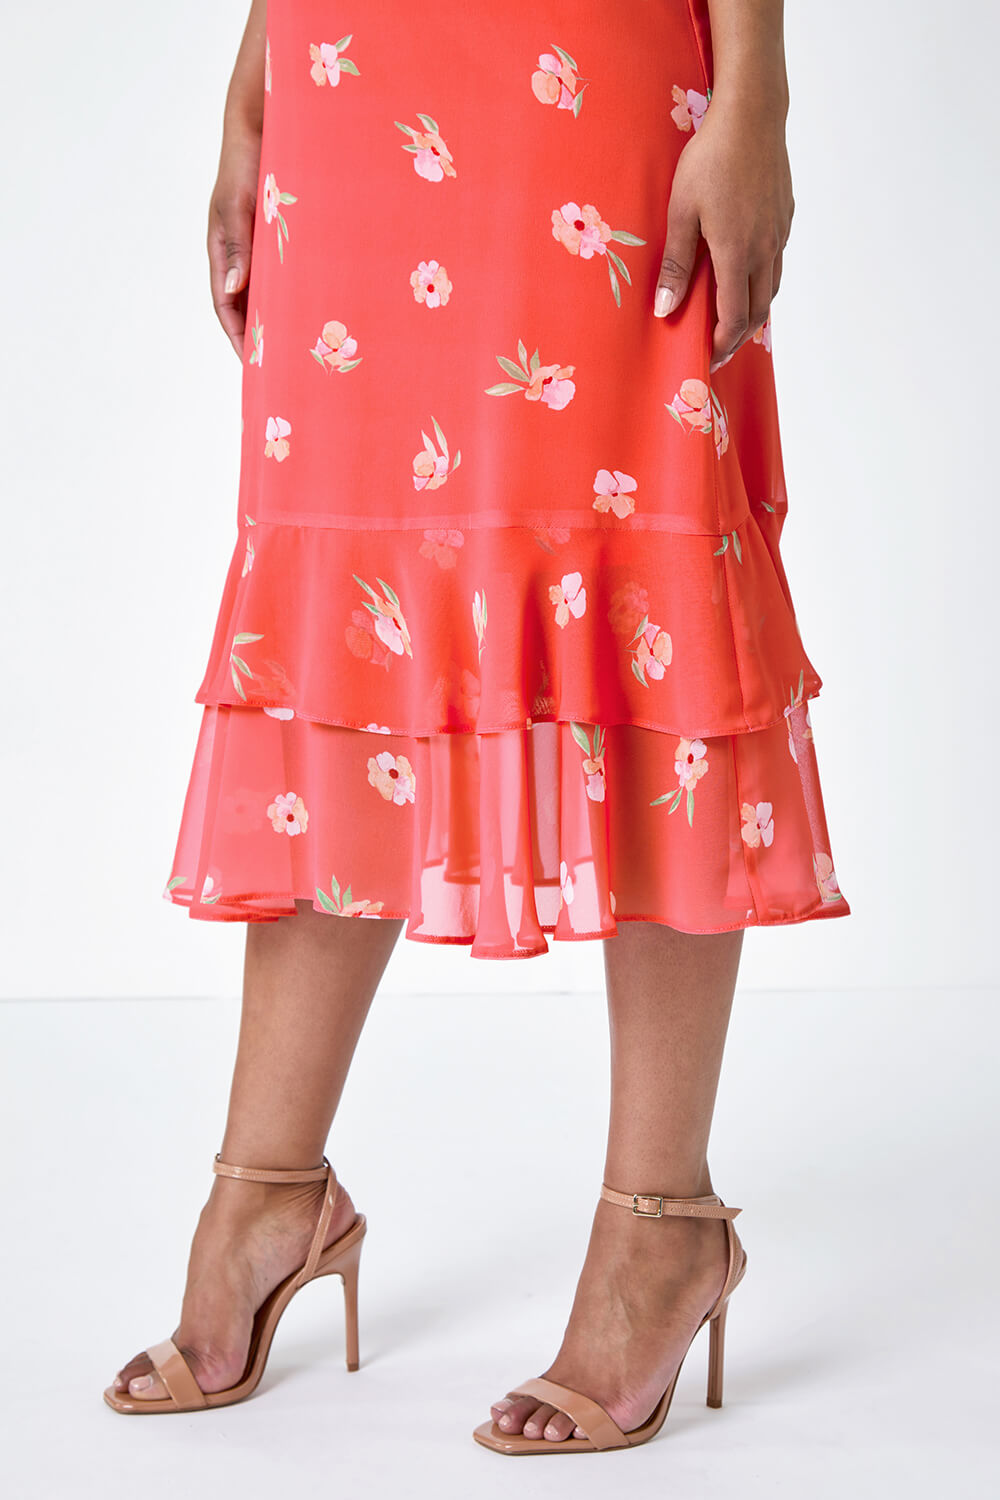 CORAL Petite Floral Frill Tiered Midi Dress, Image 5 of 5